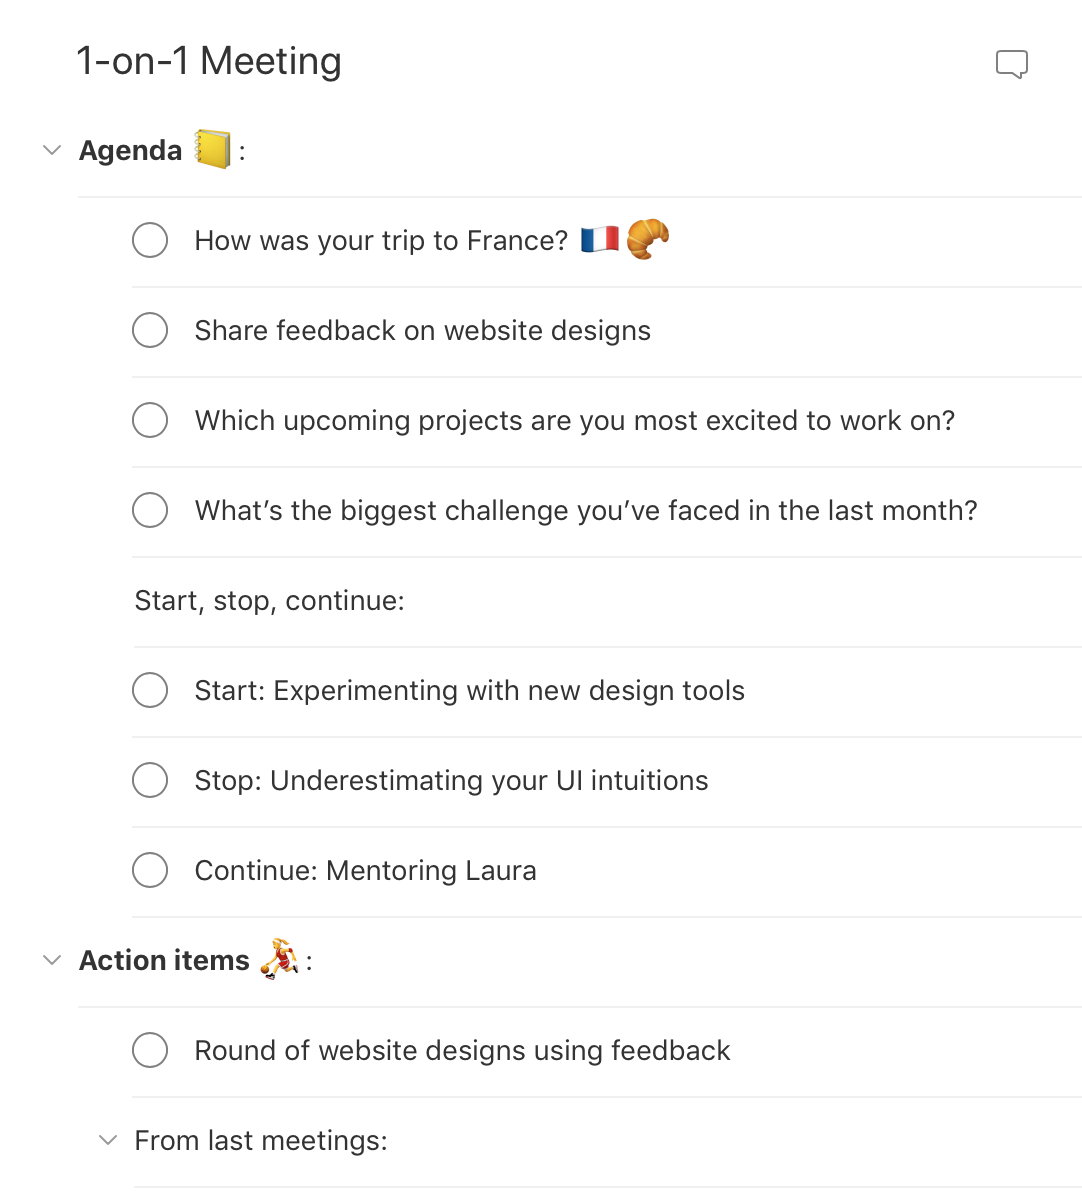 20-on-20 Meeting - Templates  Todoist Pertaining To One On One Meeting Template